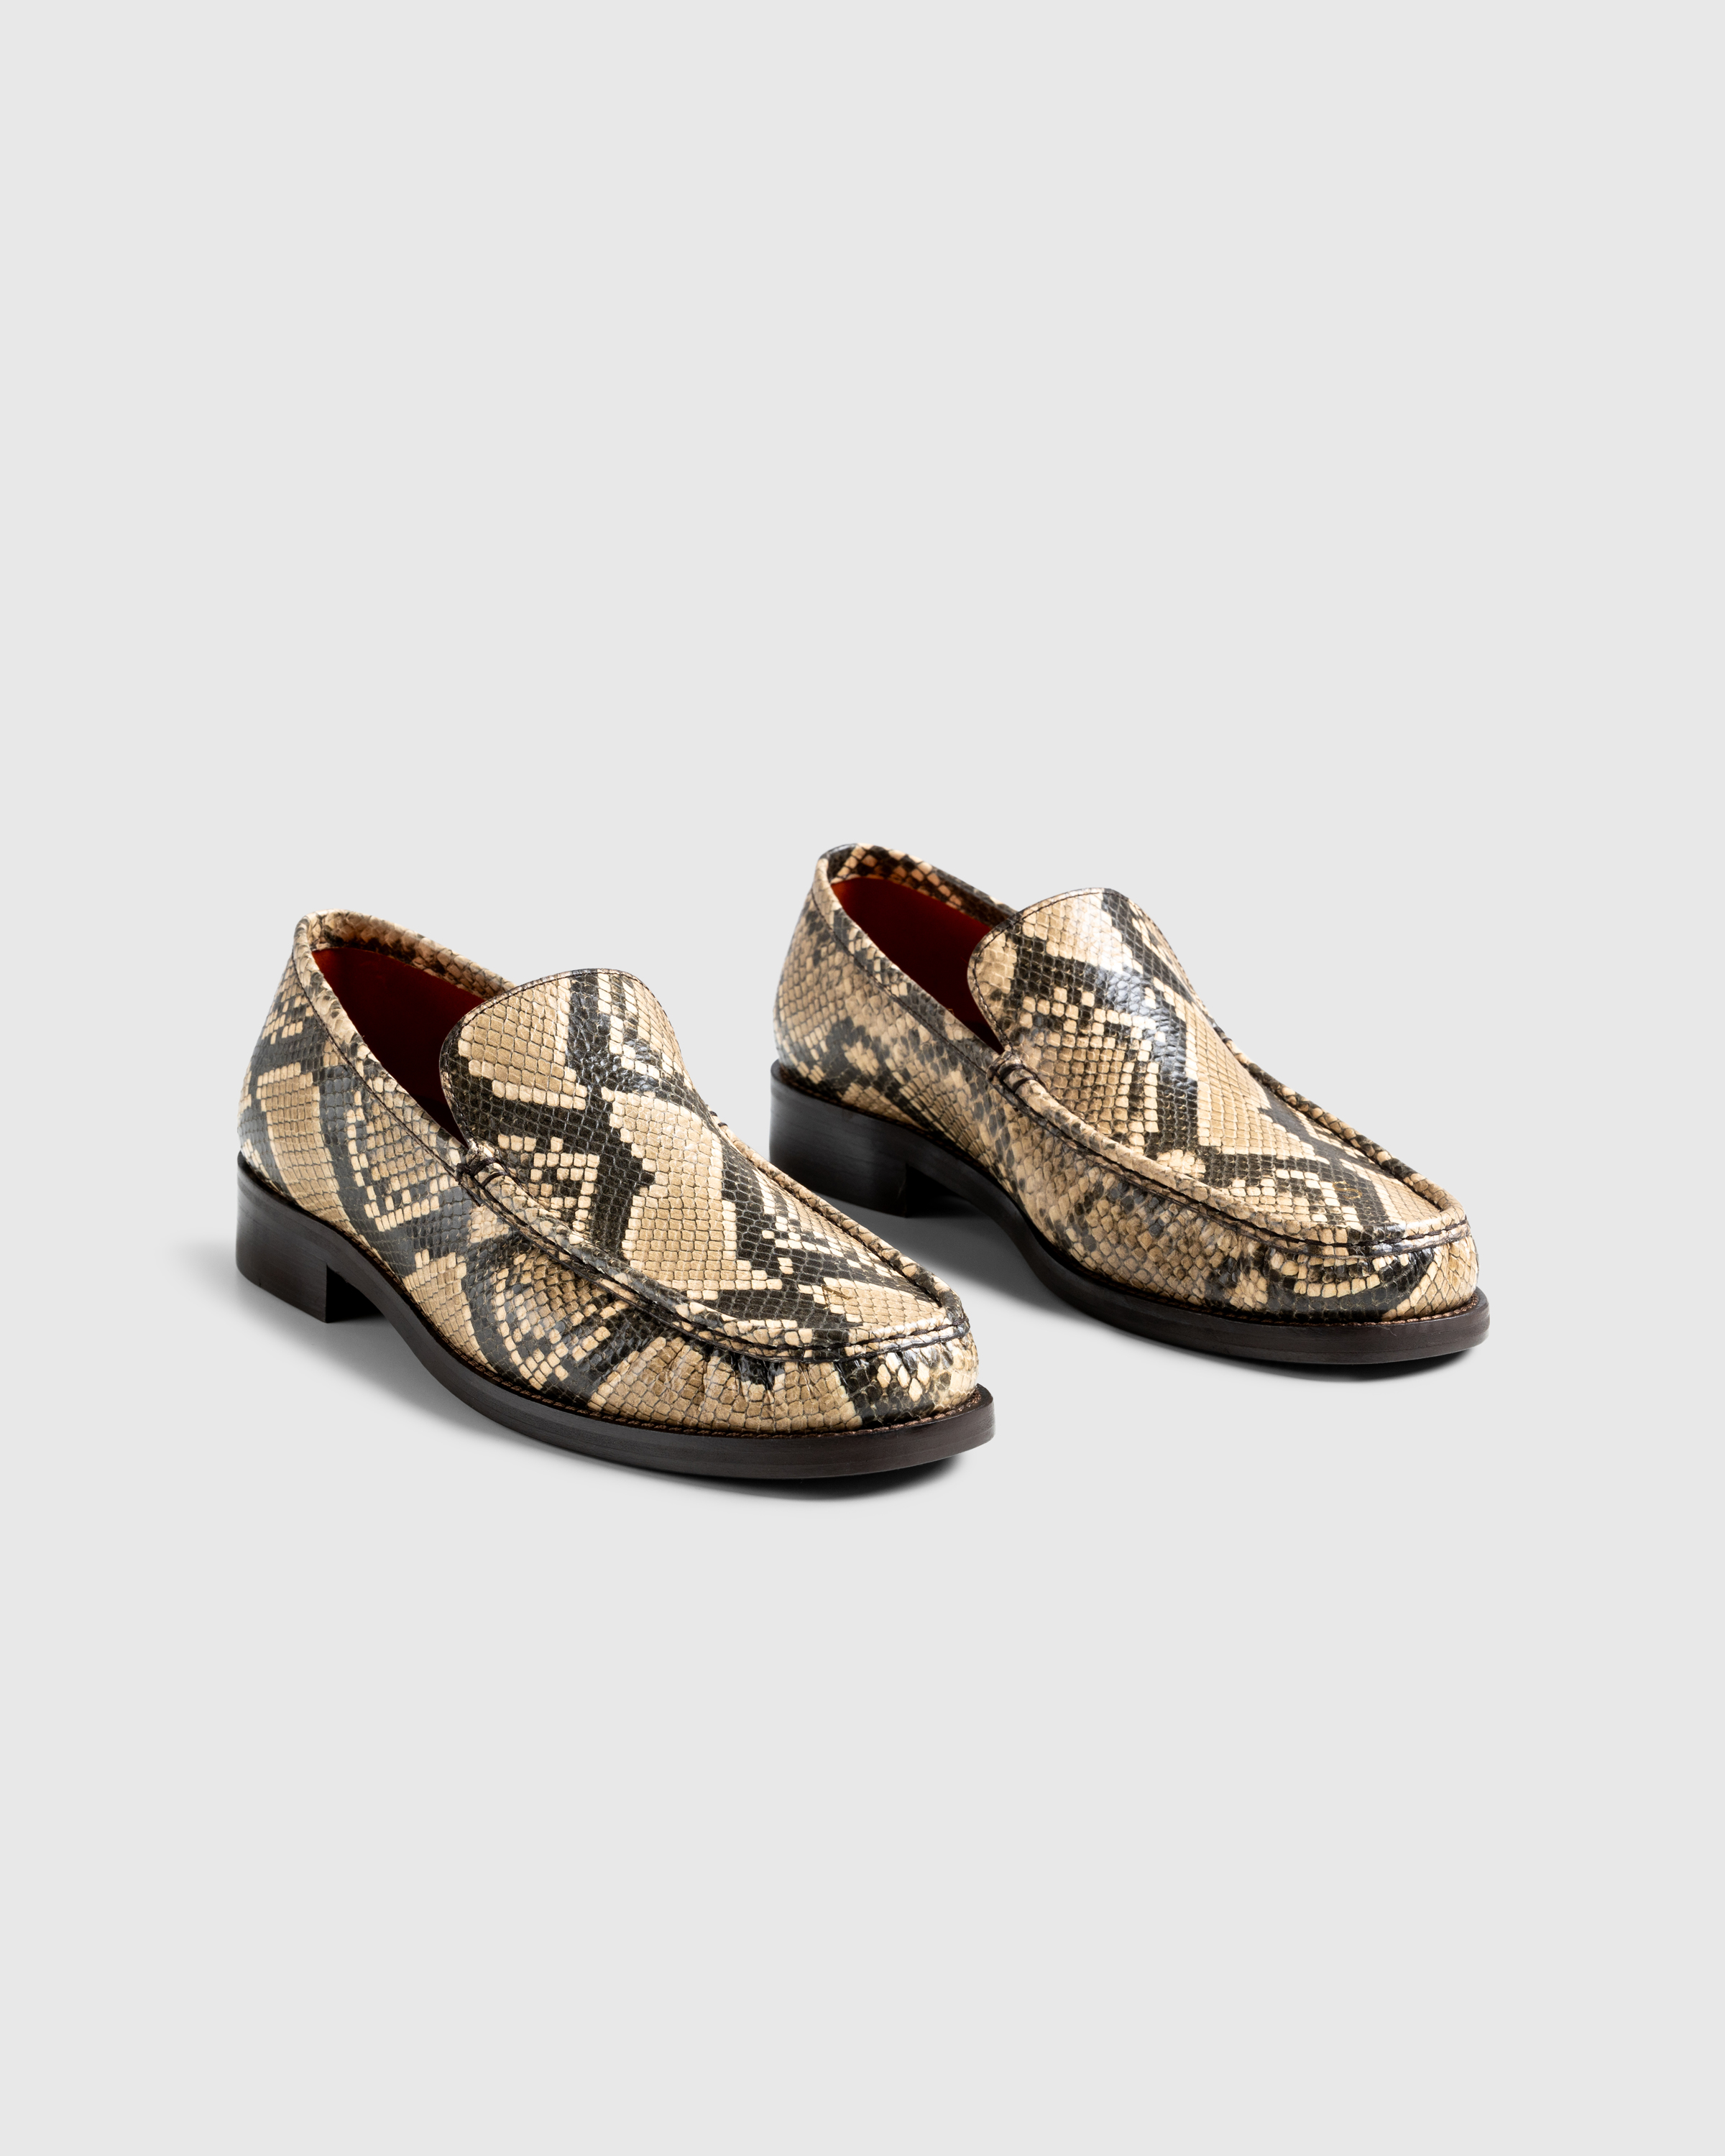 Acne Studios – Leather Loafers Beige - Sneakers - Beige - Image 3